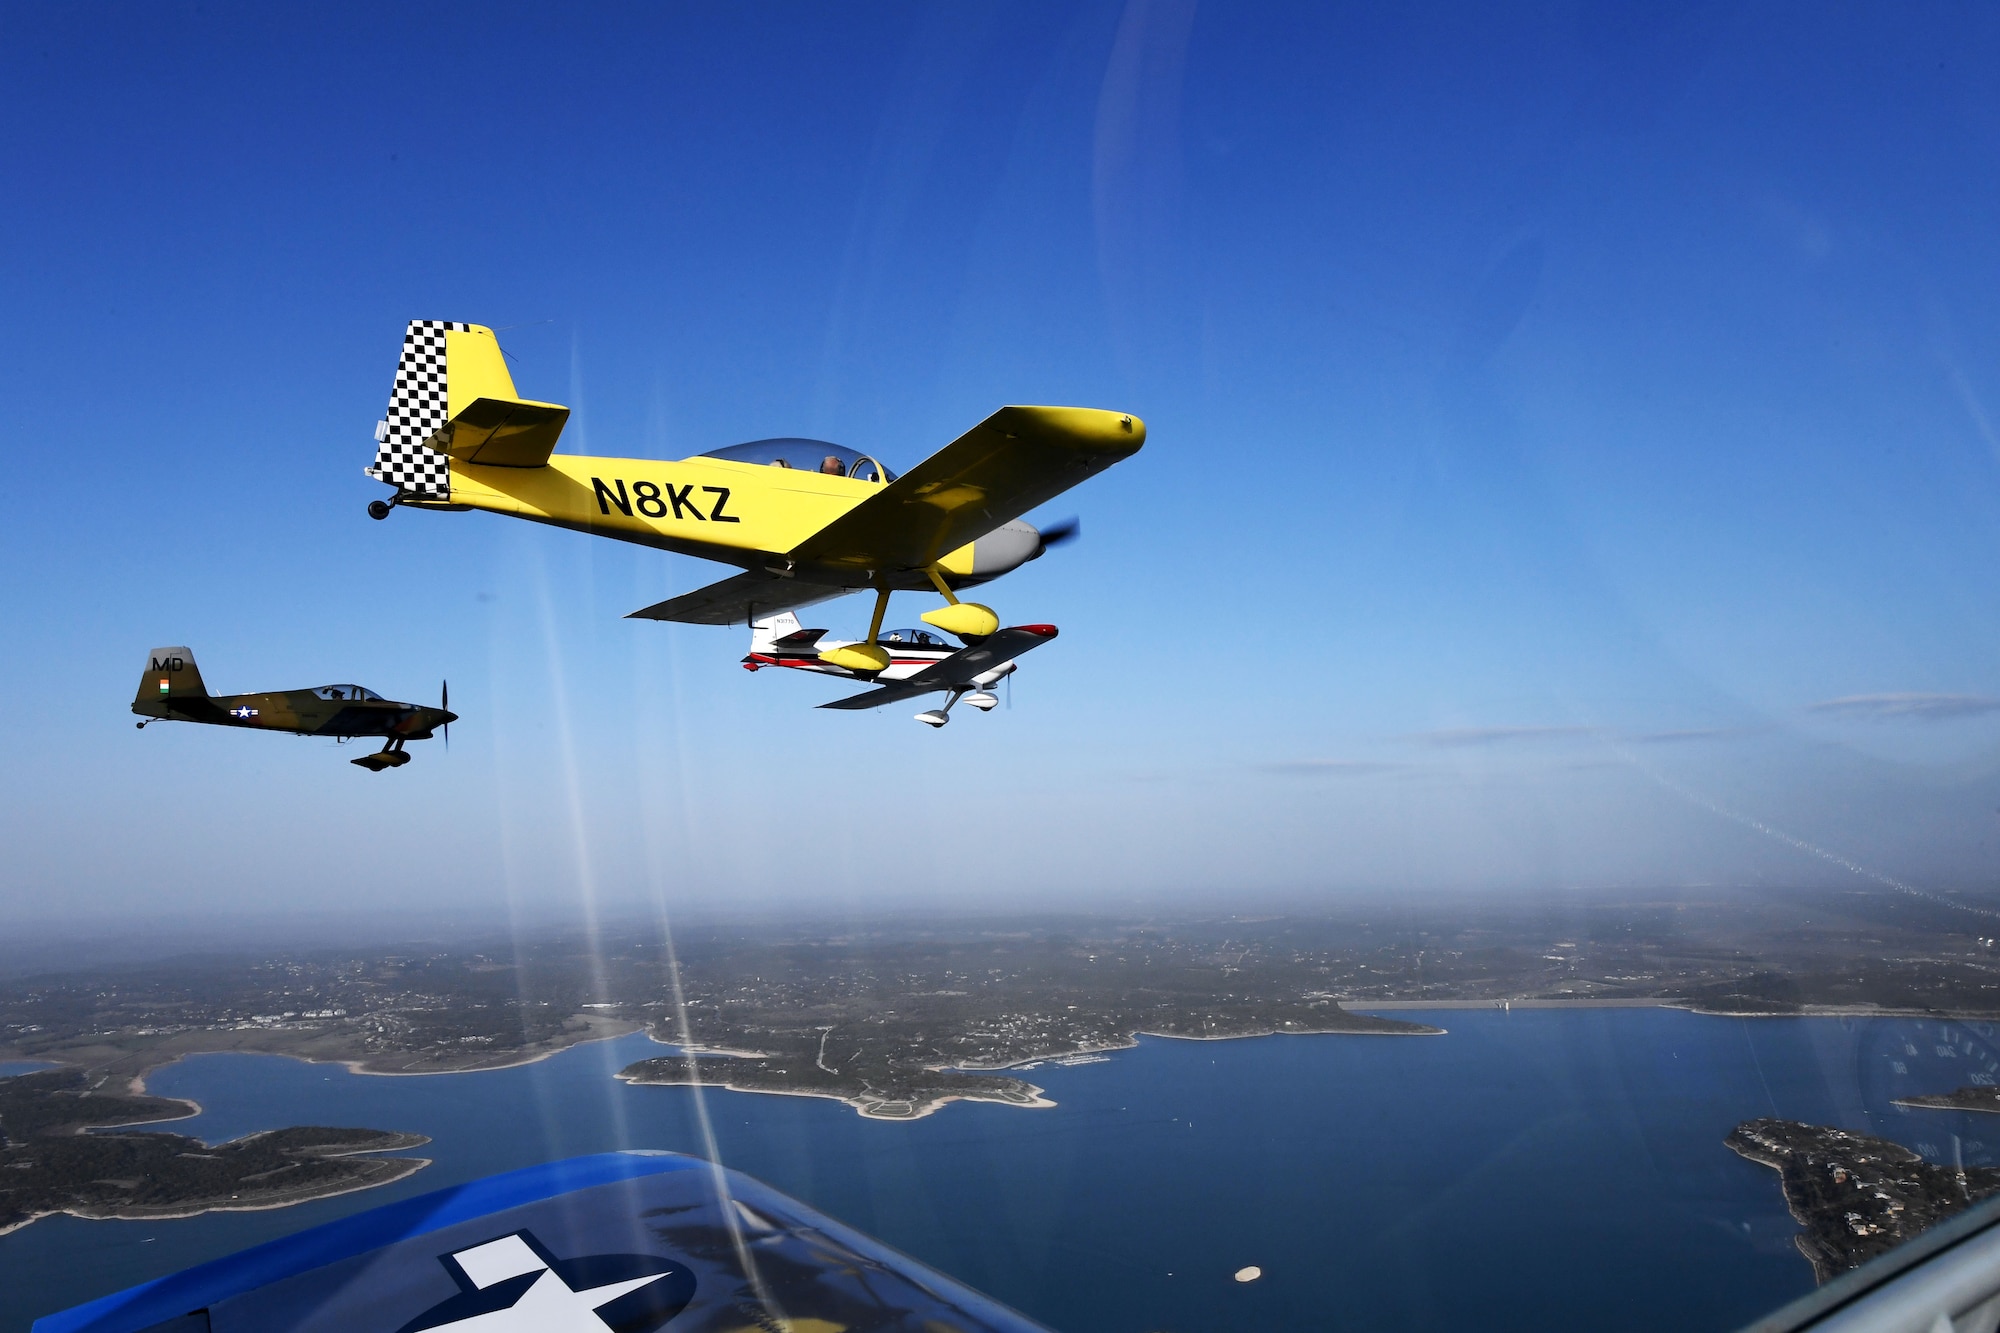 Maj. Cindy Piccirillo, 149th Fighter Wing director of inspections, flies over Bulverde, Texas, March 15, 2021, during a ride with Col. Raul Rosario, 149th FW commander, in an RV-4 airplane alongside similar aircraft.